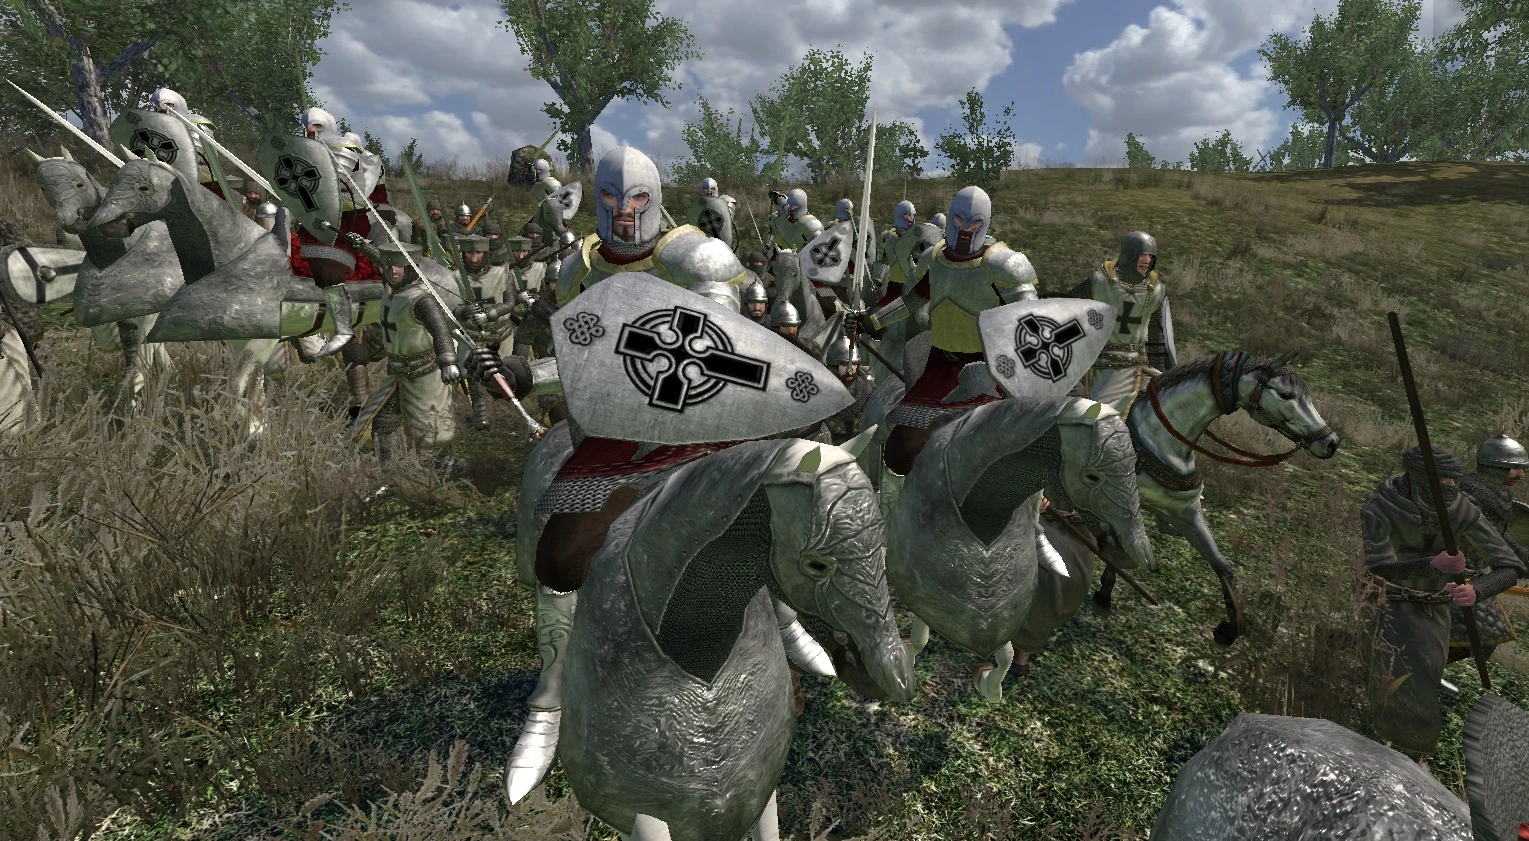 Warband perisno. Mount and Blade 1. Mount & Blade Перисно. Mount and Blade 2 Bannerlord Perisno. Mount and Blade Warband Perisno.